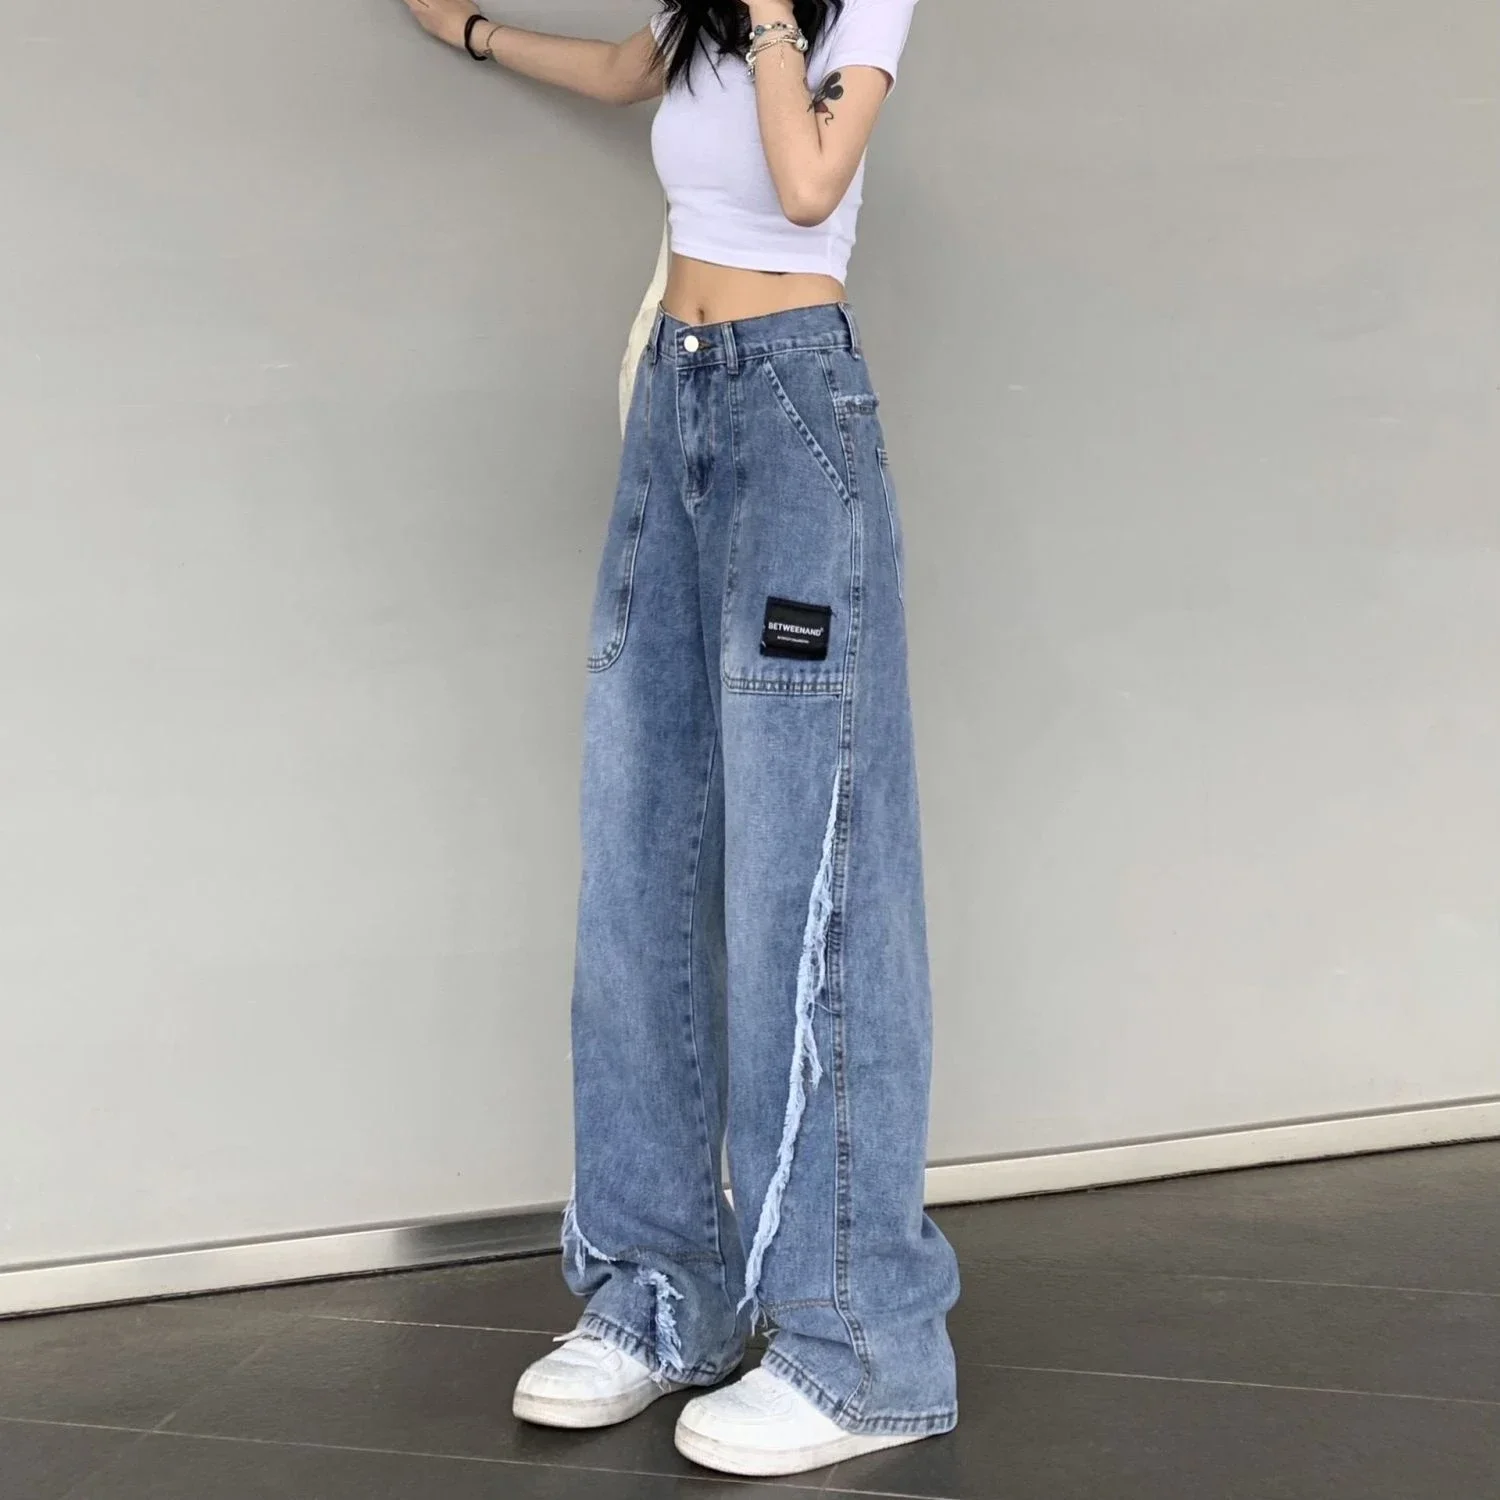 

Trousers High Waist Shot with Pockets Women's Jeans Straight Leg Pants for Woman Blue Basics A Fitted Pant Medium Loosefit Emo Z